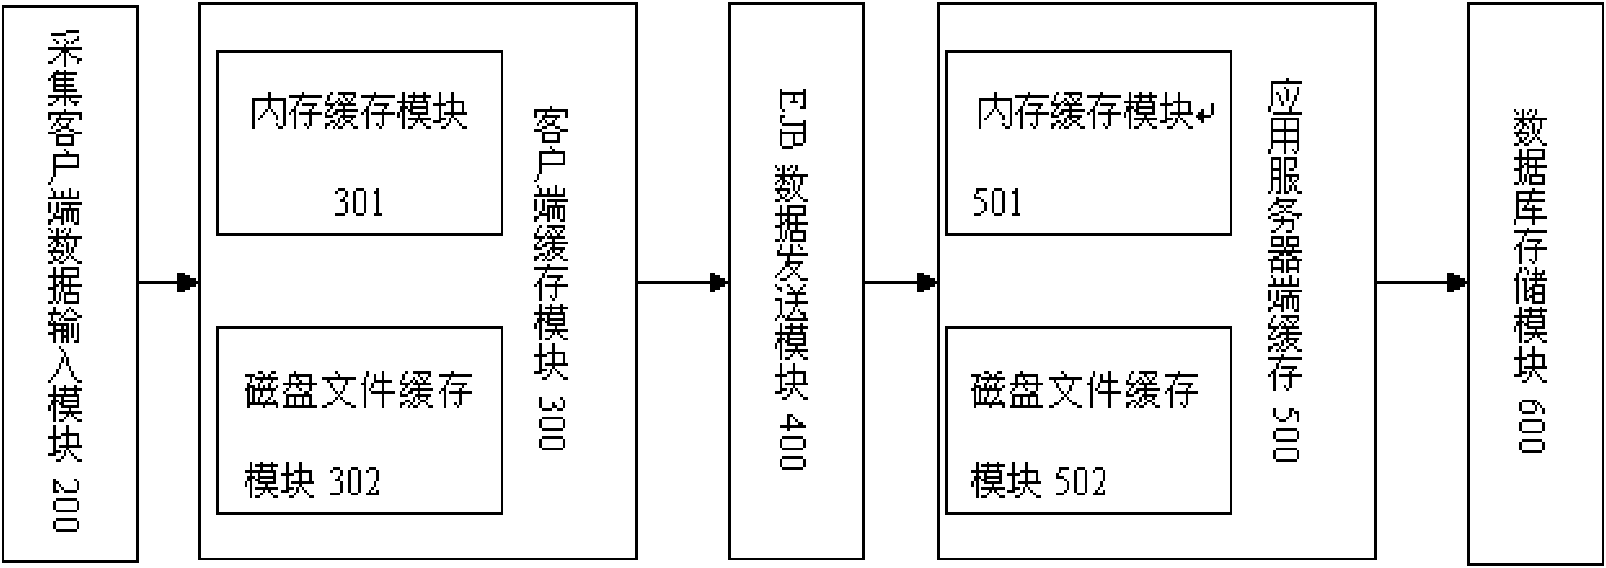 Data storing system and method based on cache